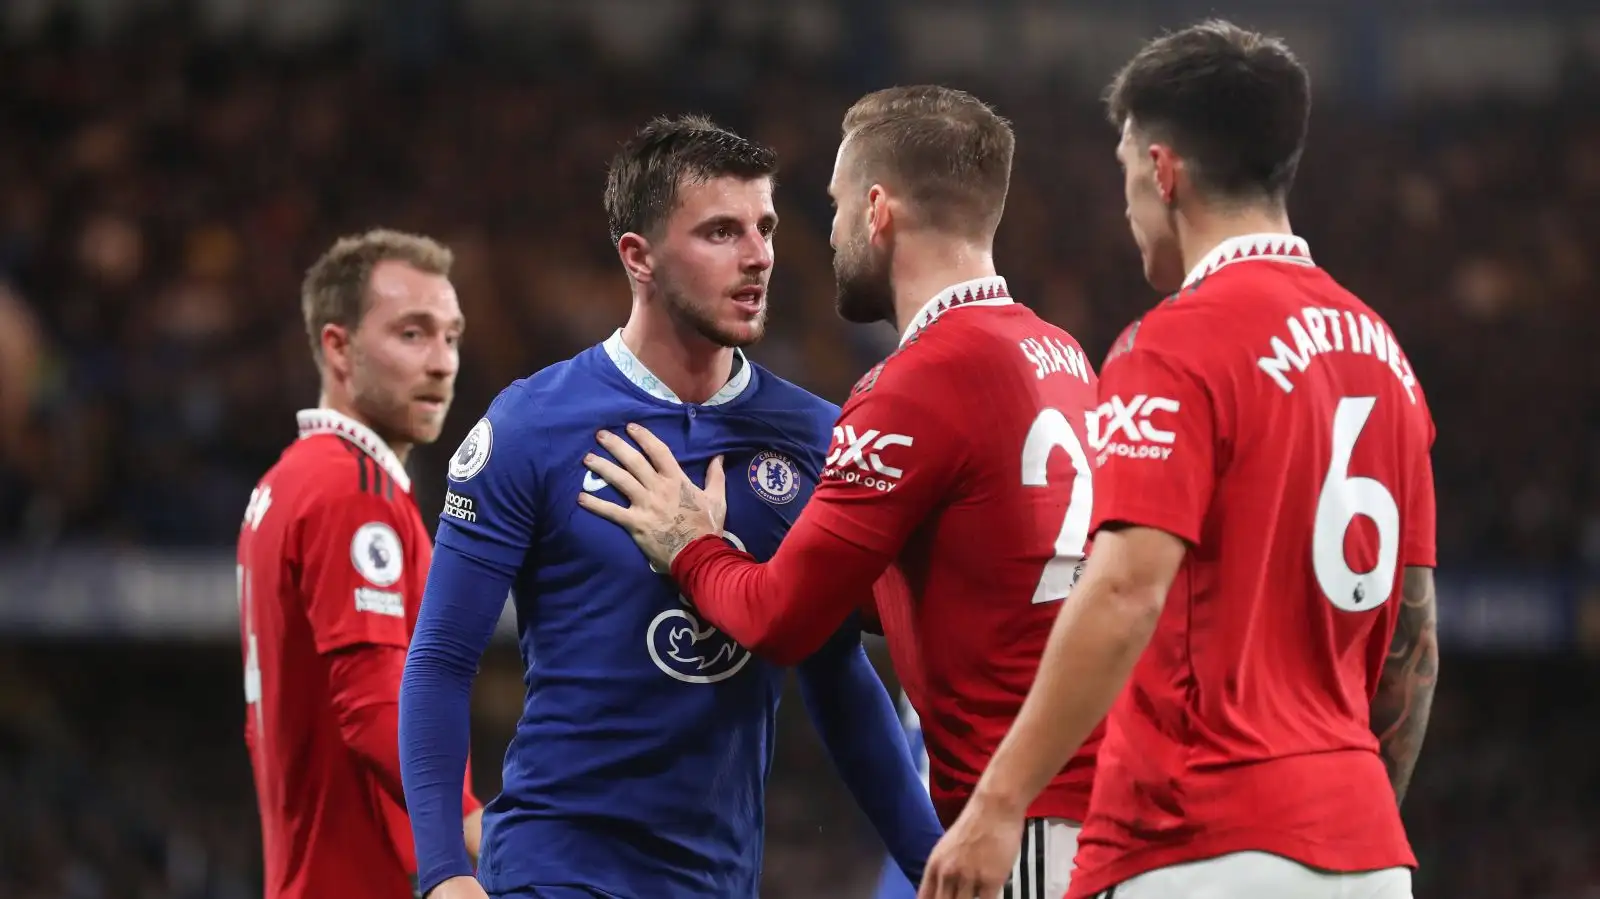 Chelsea midfielder Mason Mount clashes with Man Utd players during a Premier League game